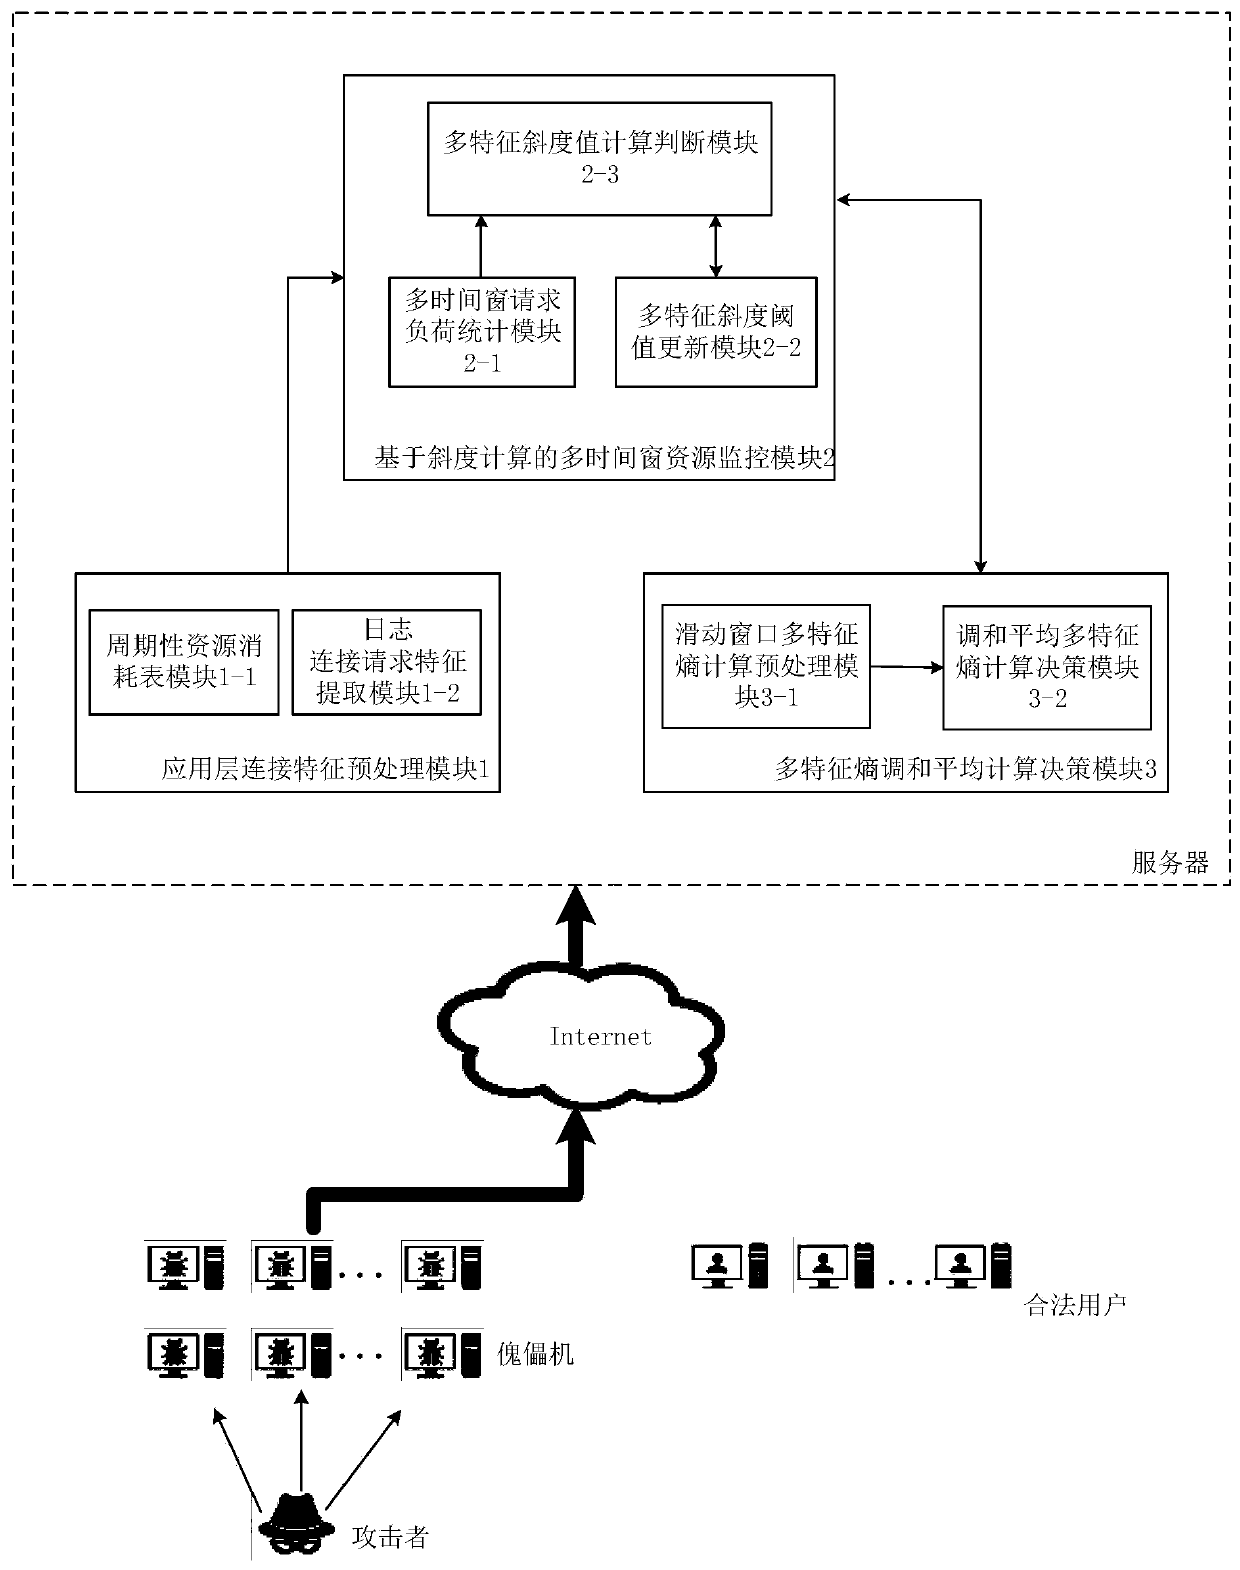 Application layer DDoS attack detection and defense method based on multiple feature entropies